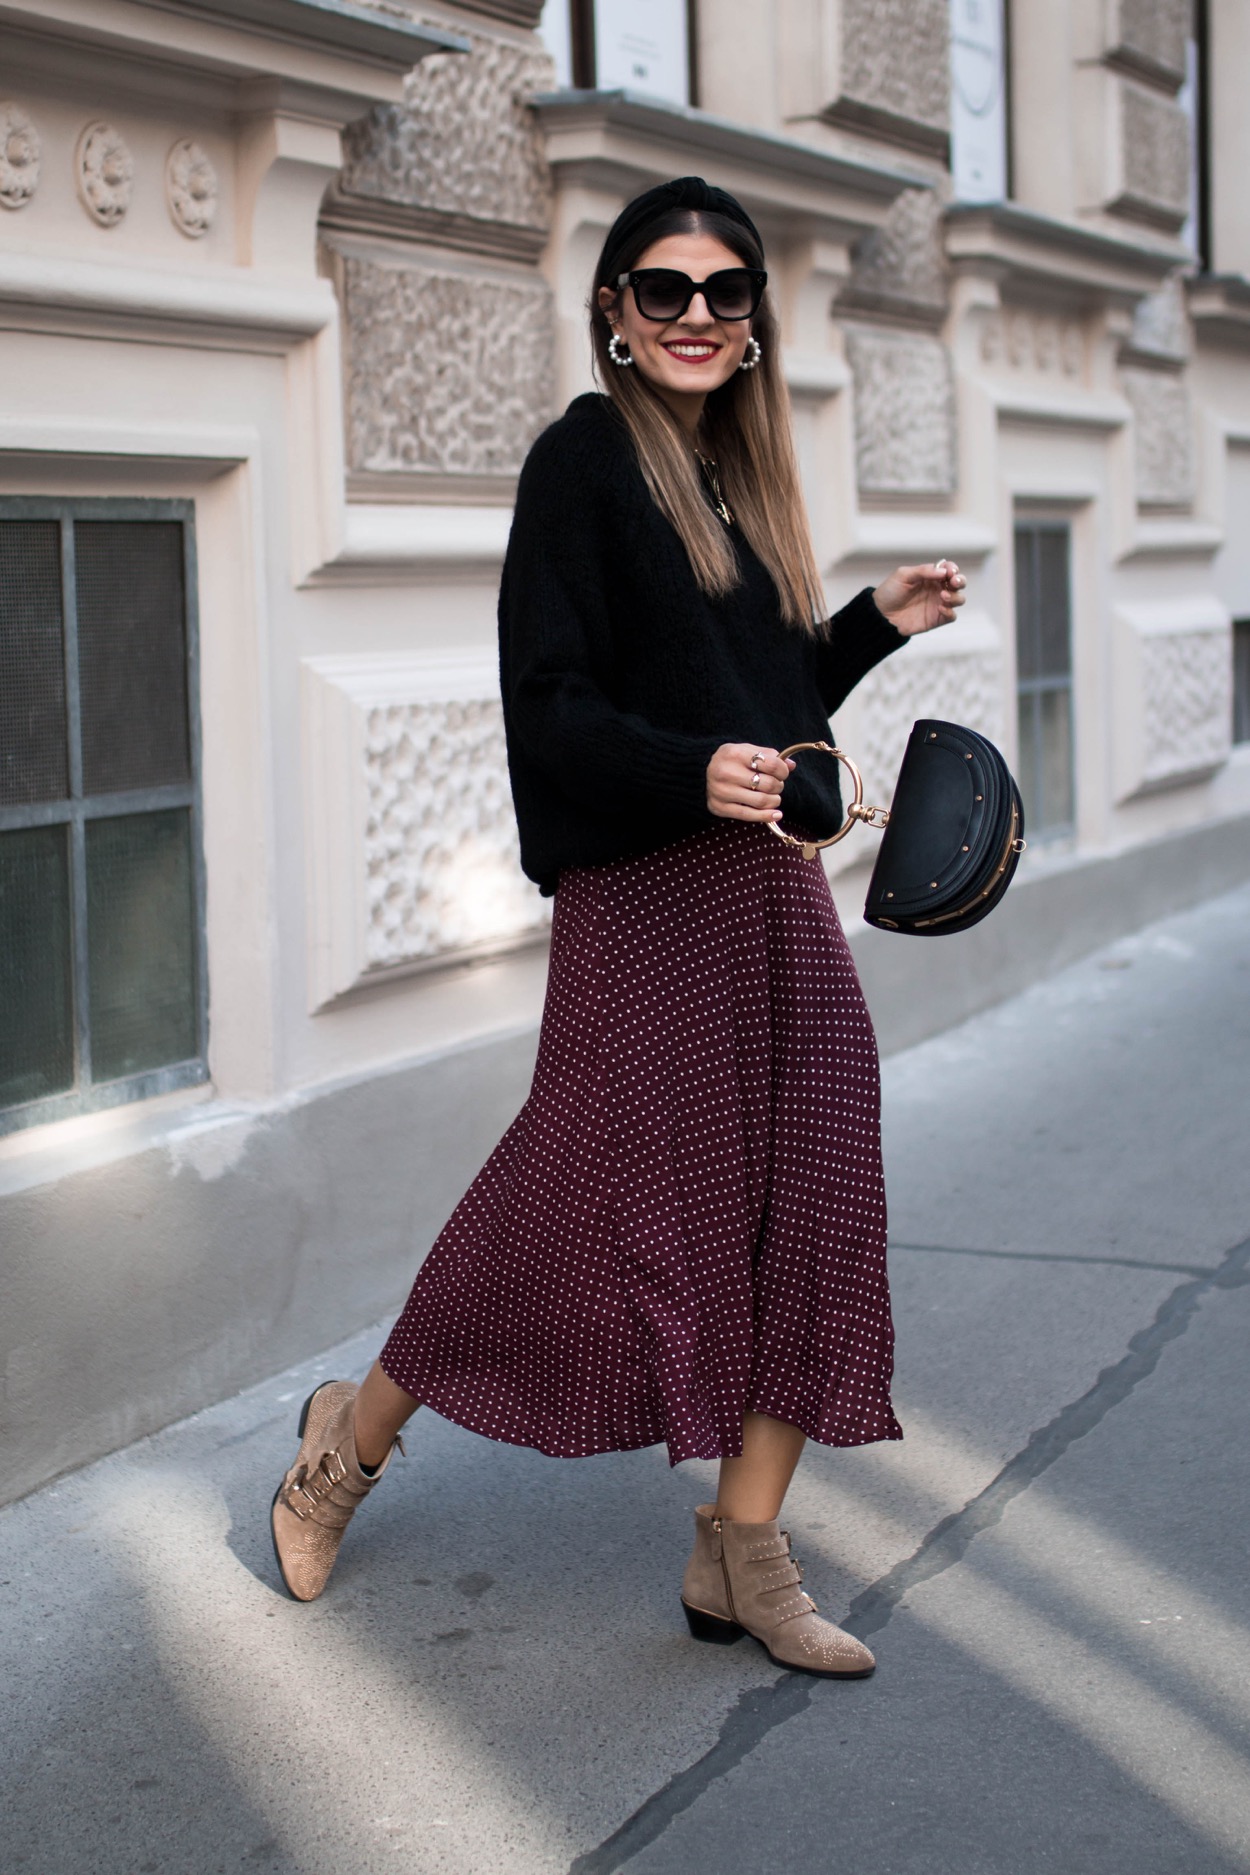 How to wear skirts during autumn